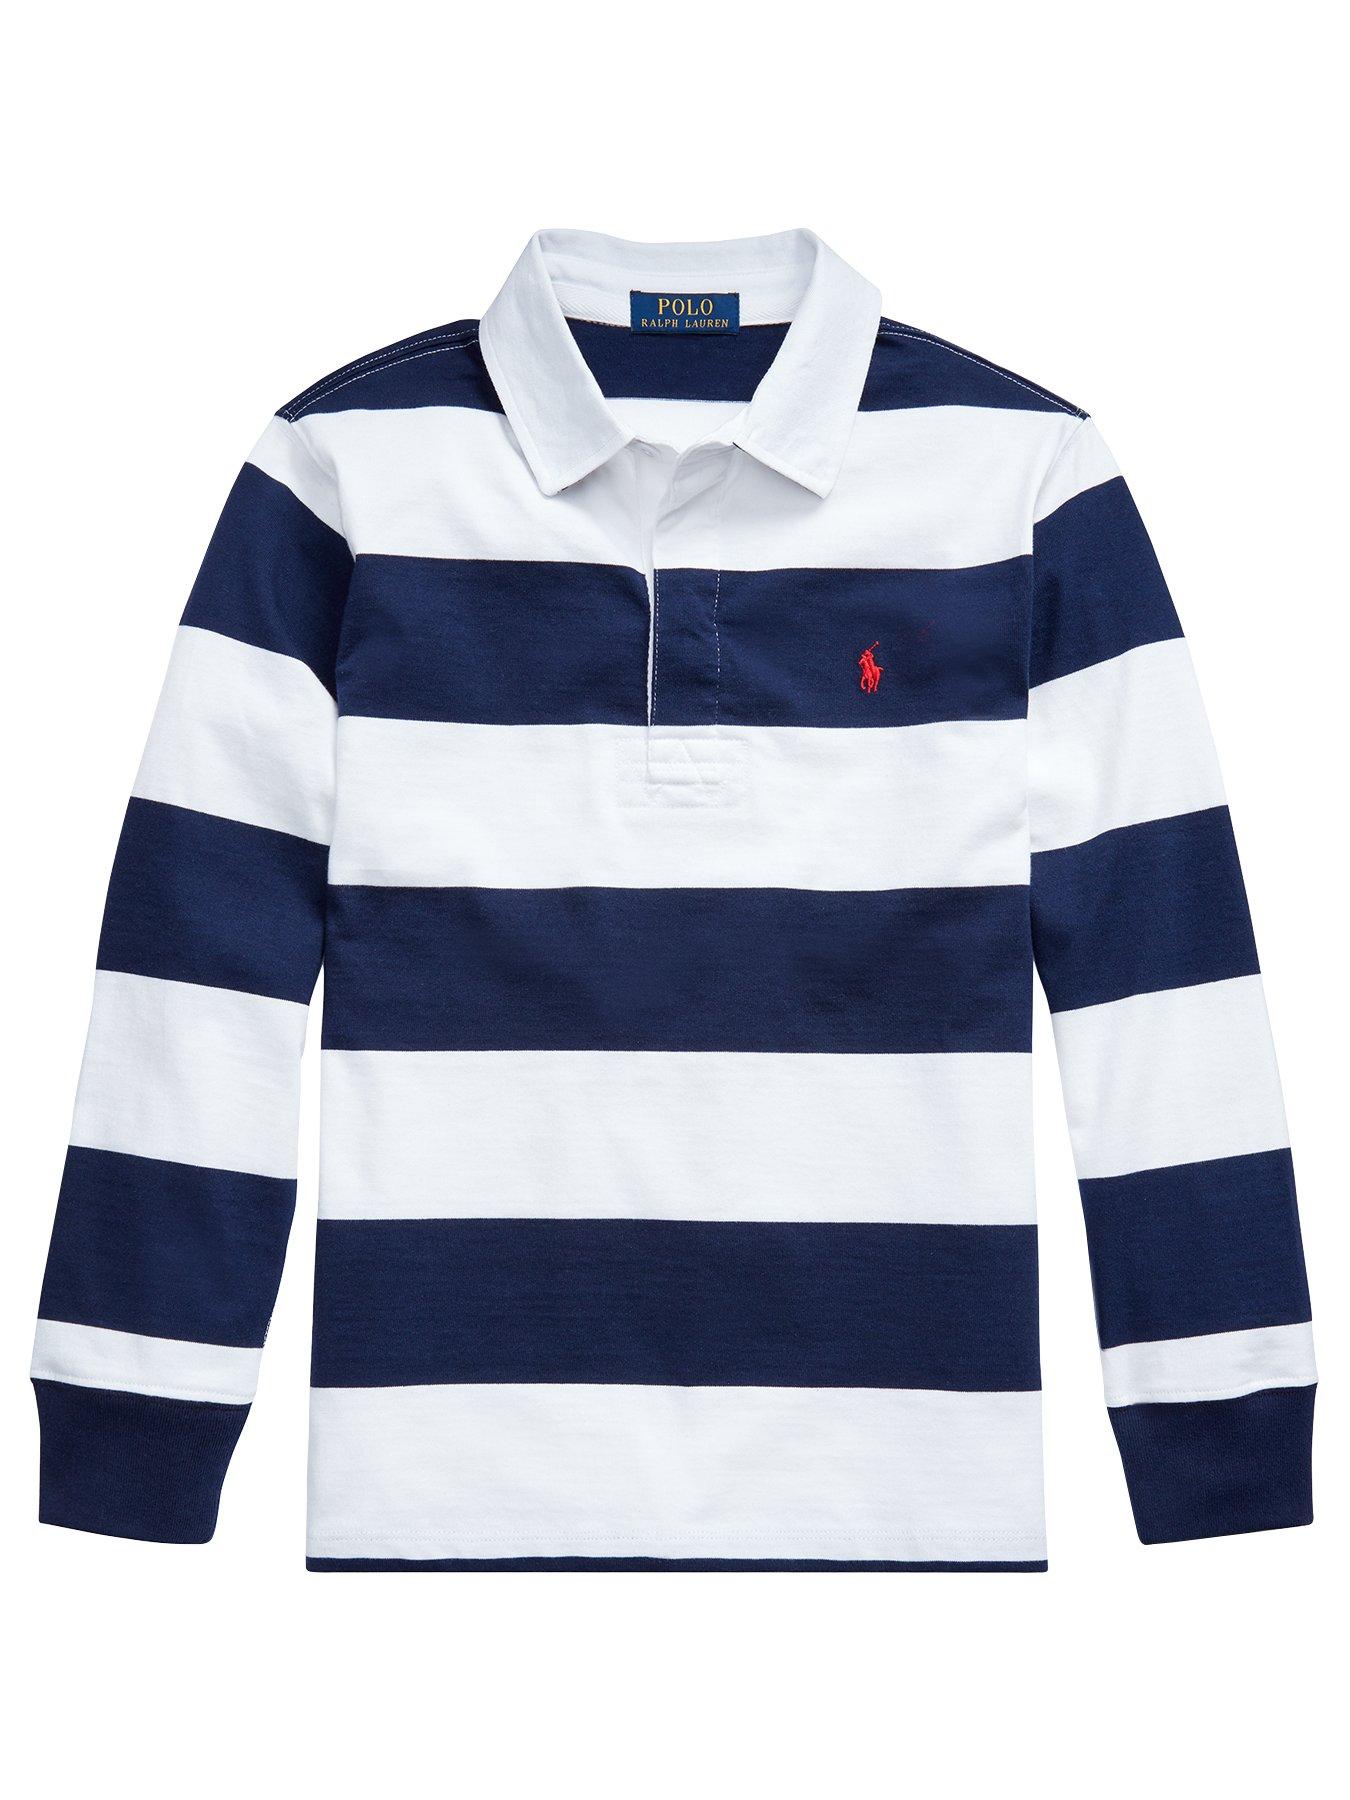 polo rugby top